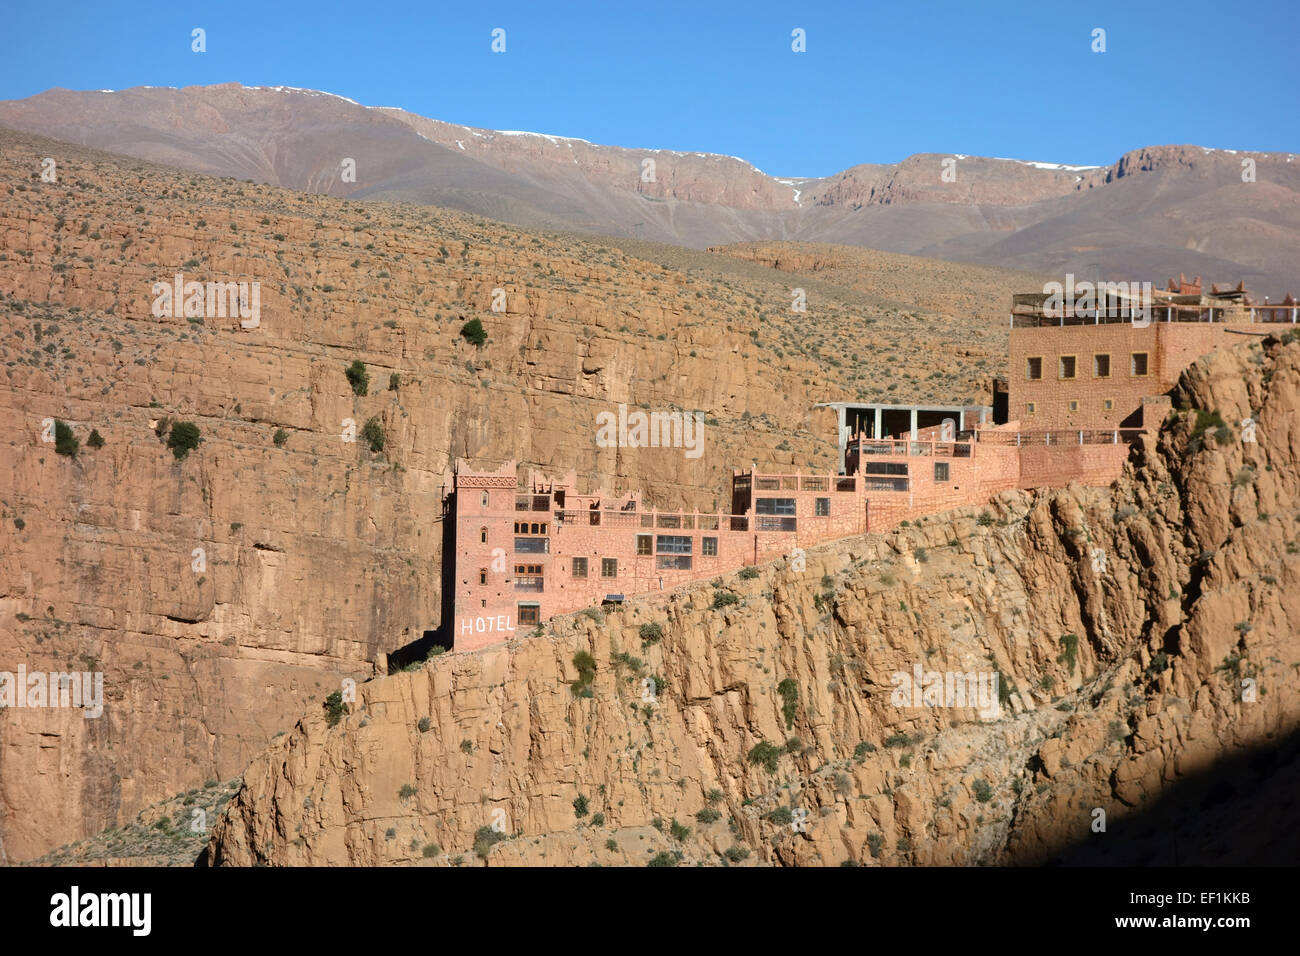 Hotel in the Atlas mountains in Dades Gorge, Morocco Stock Photo